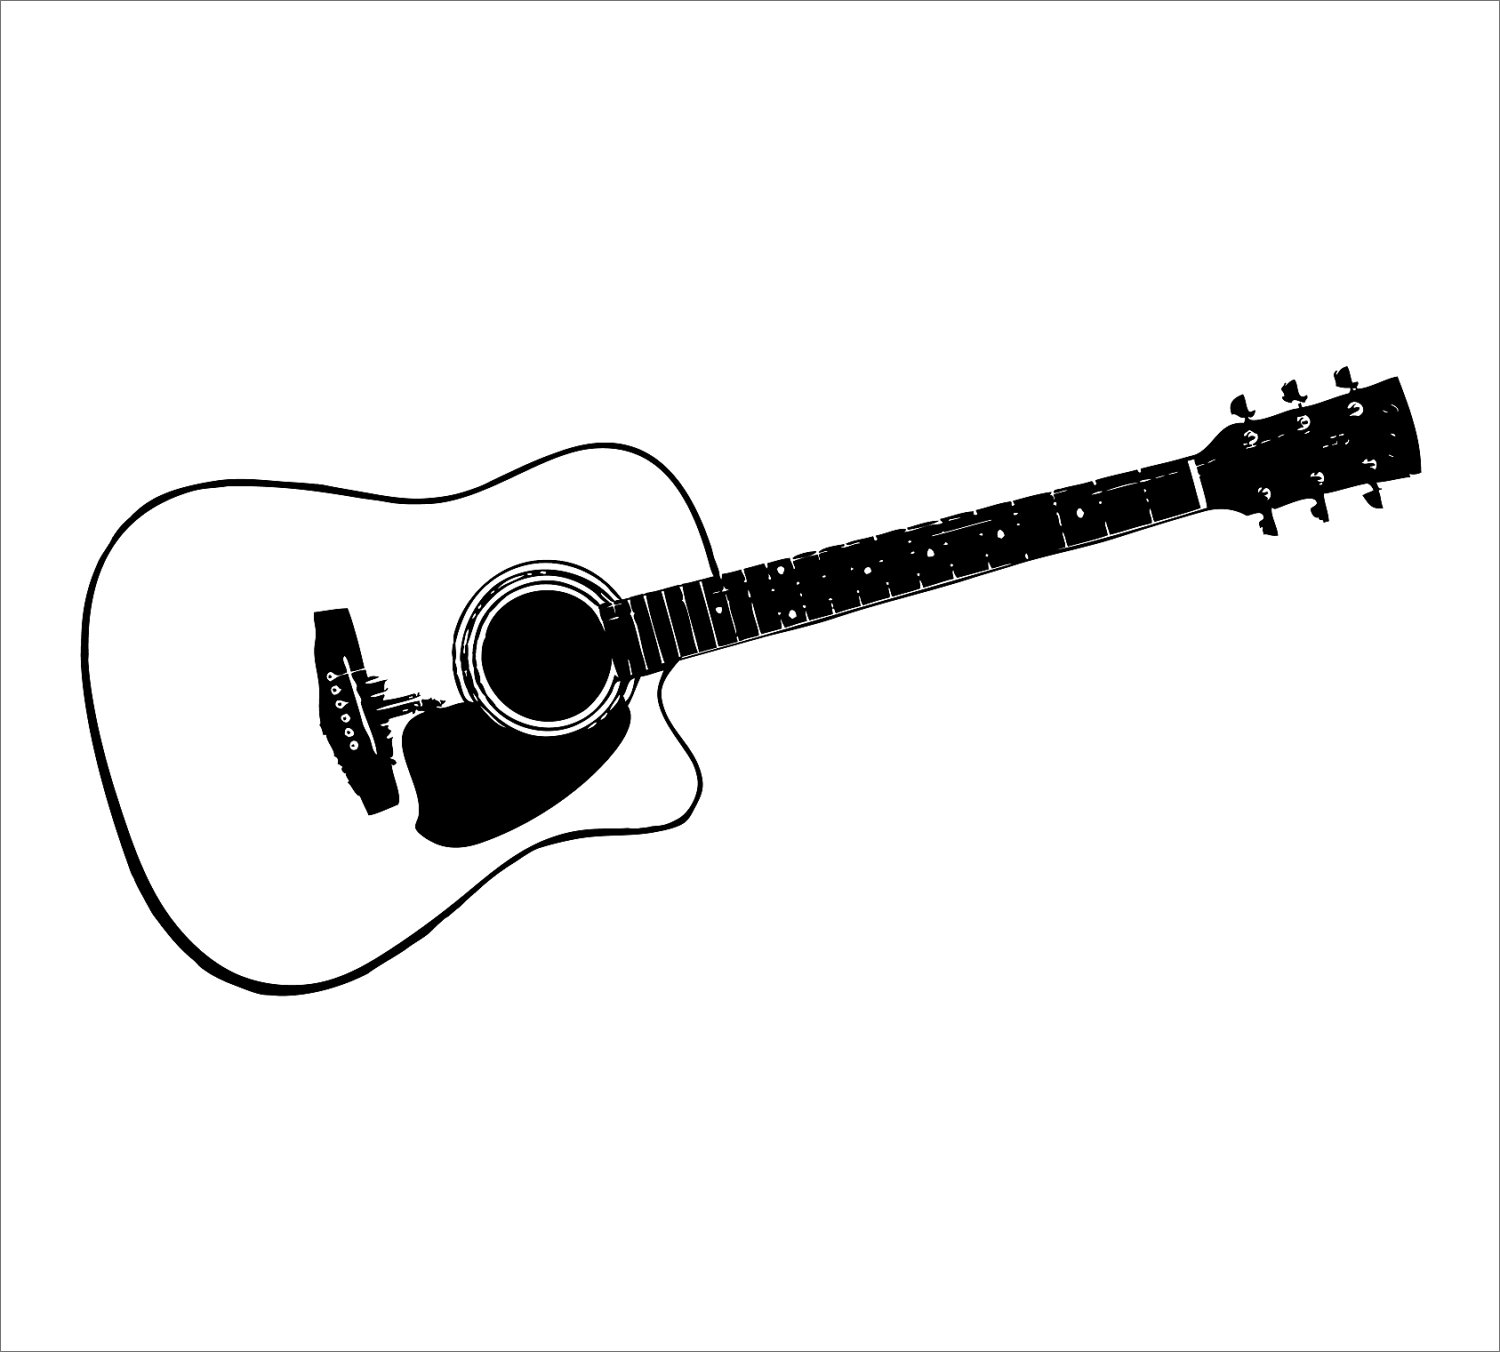 Free Guitar Clipart Black and White Image - 10291, Black And White ...